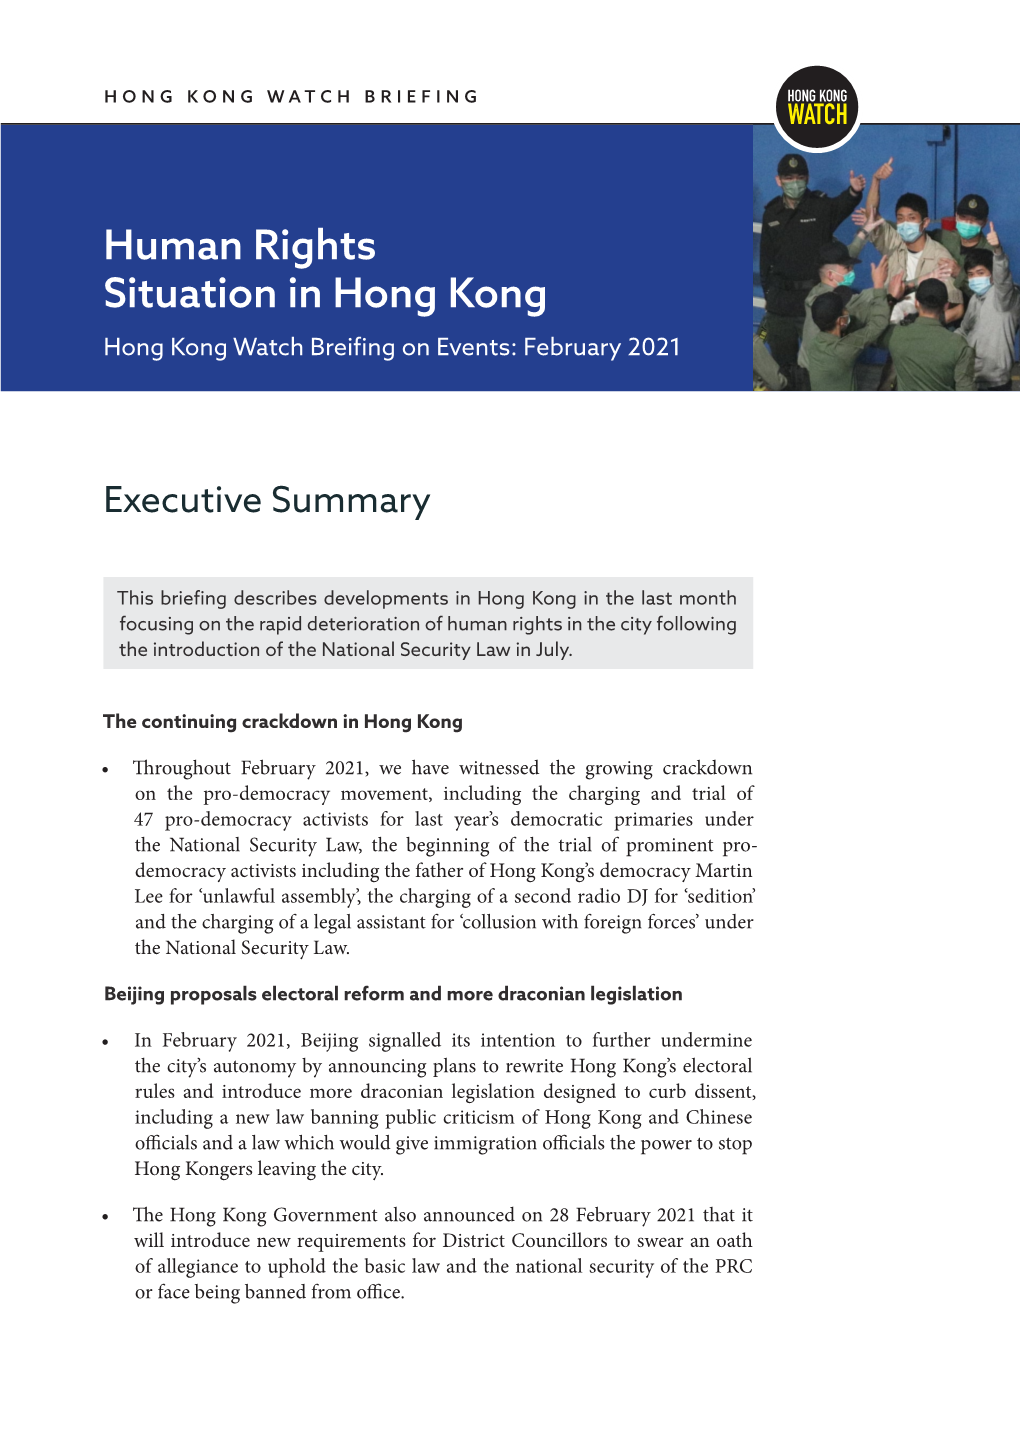 Human Rights Situation in Hong Kong Hong Kong Watch Breifing on Events: February 2021